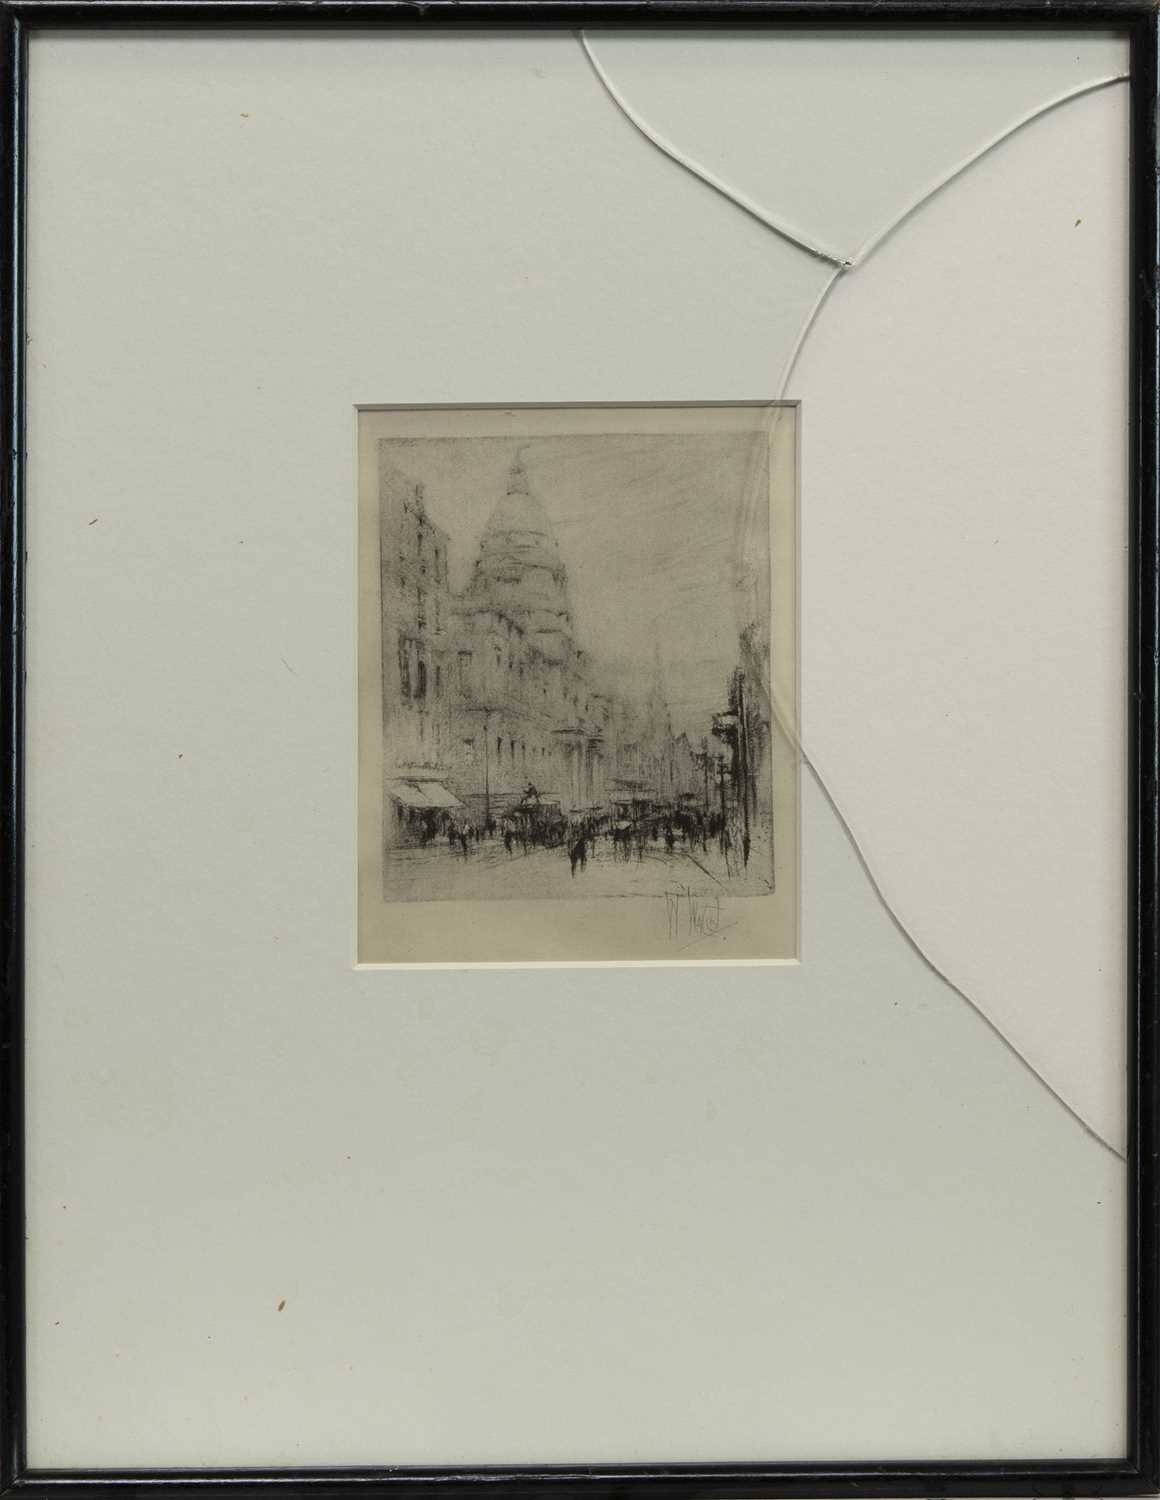 Lot 416 - SOUTH BRIDGE TO THE TRON, UNIVERSITY OF EDINBURGH, AN ETCHING BY WILLIAM WALCOT